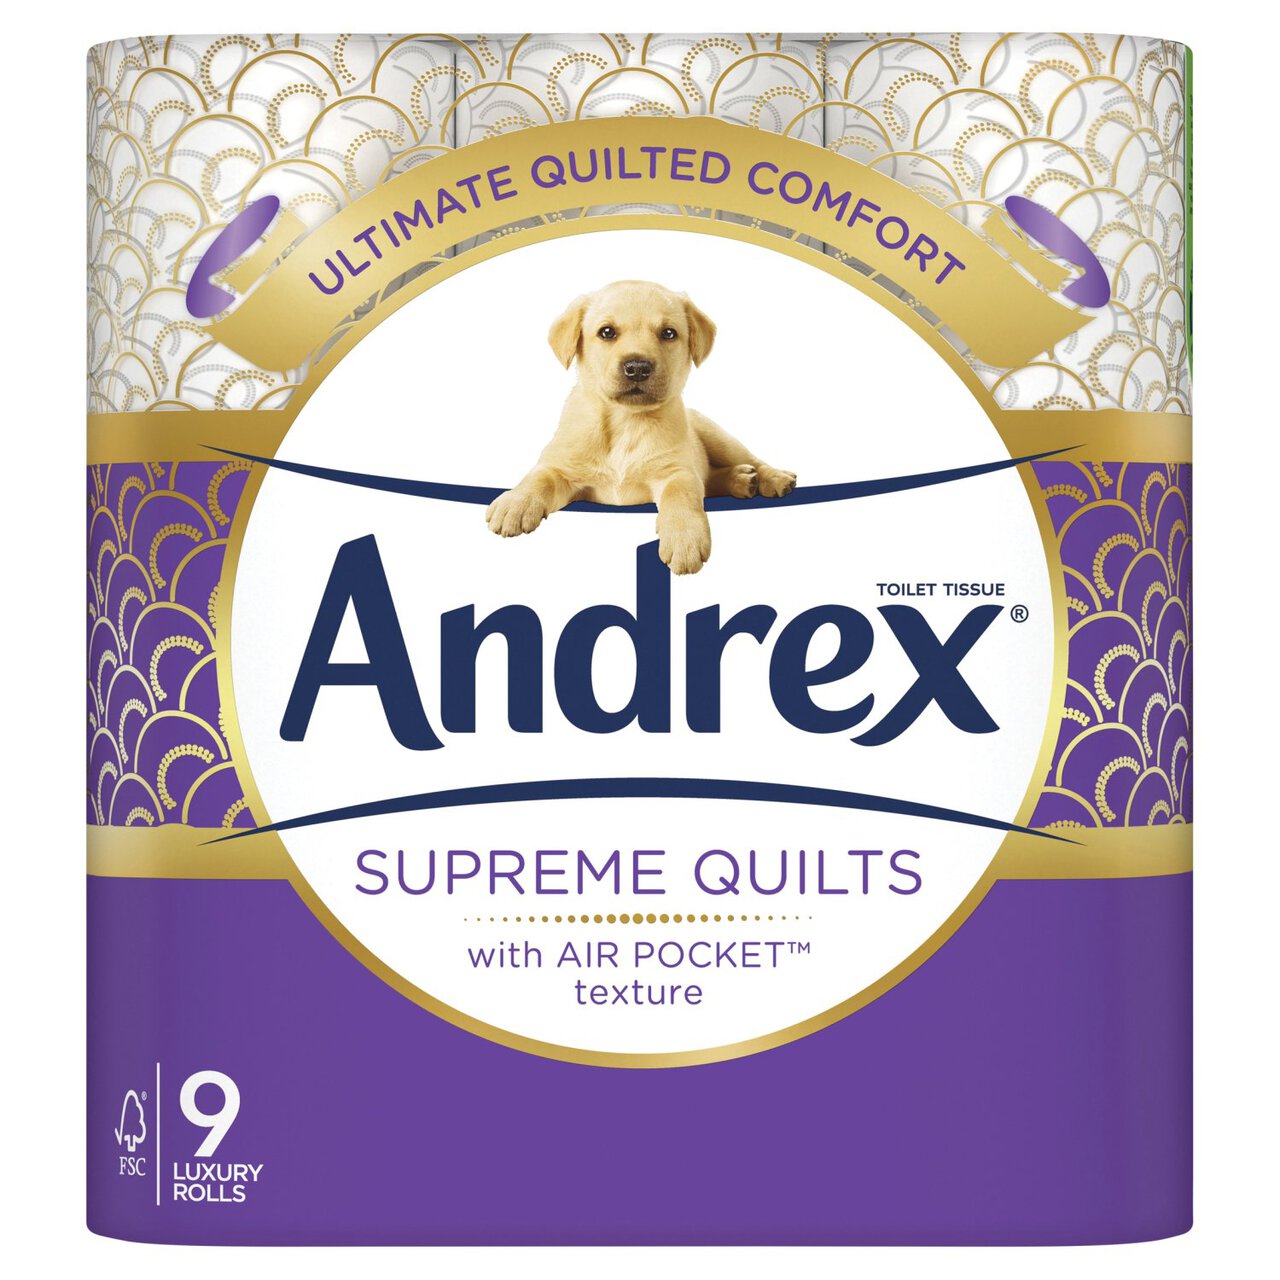 Andrex Supreme Quilts Toilet Roll 9 per pack